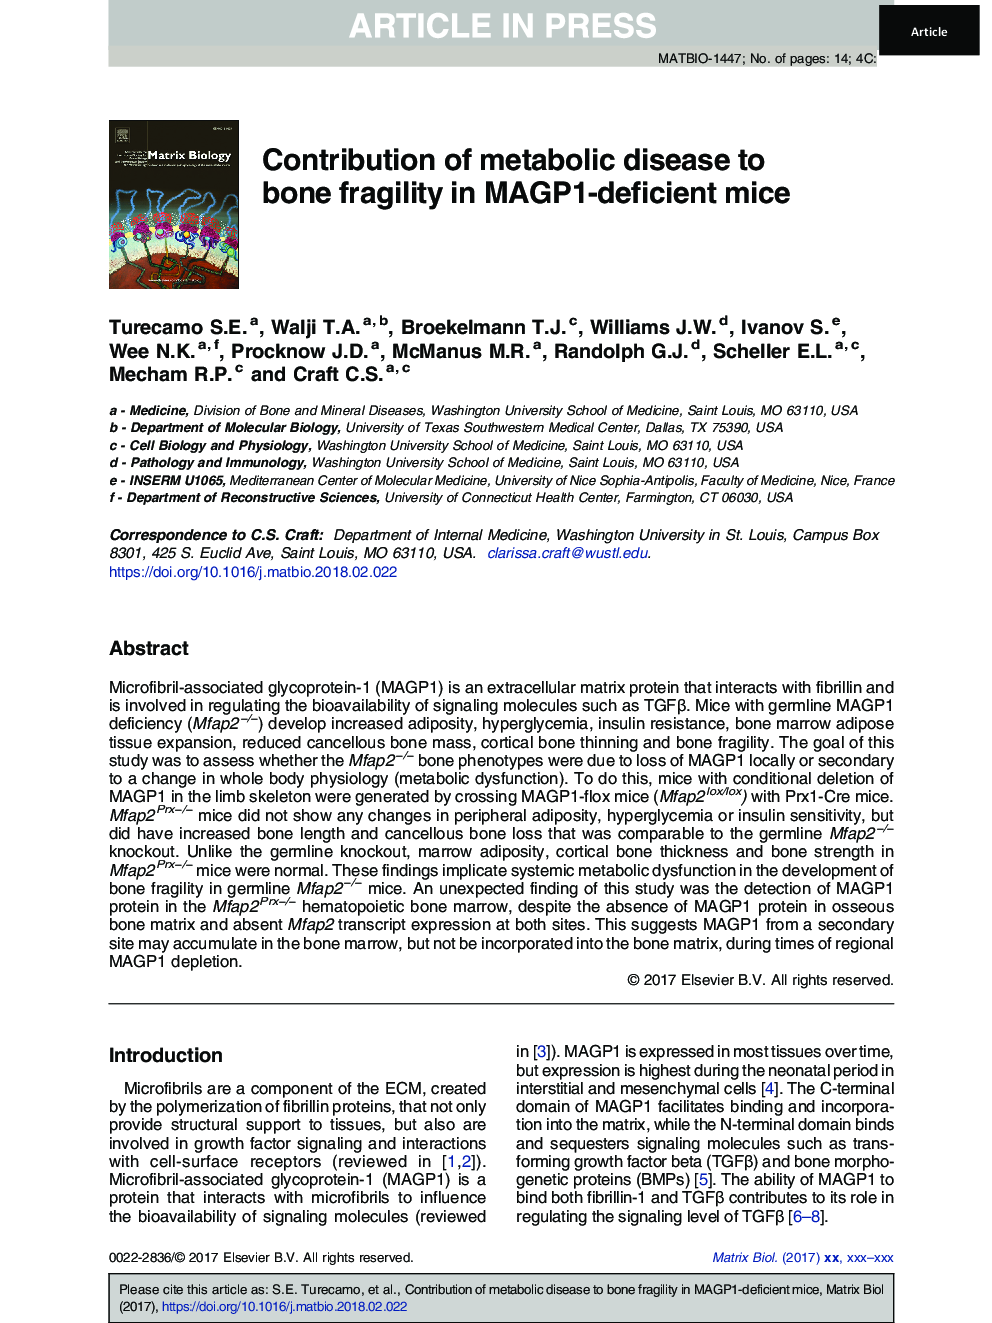 Contribution of metabolic disease to bone fragility in MAGP1-deficient mice